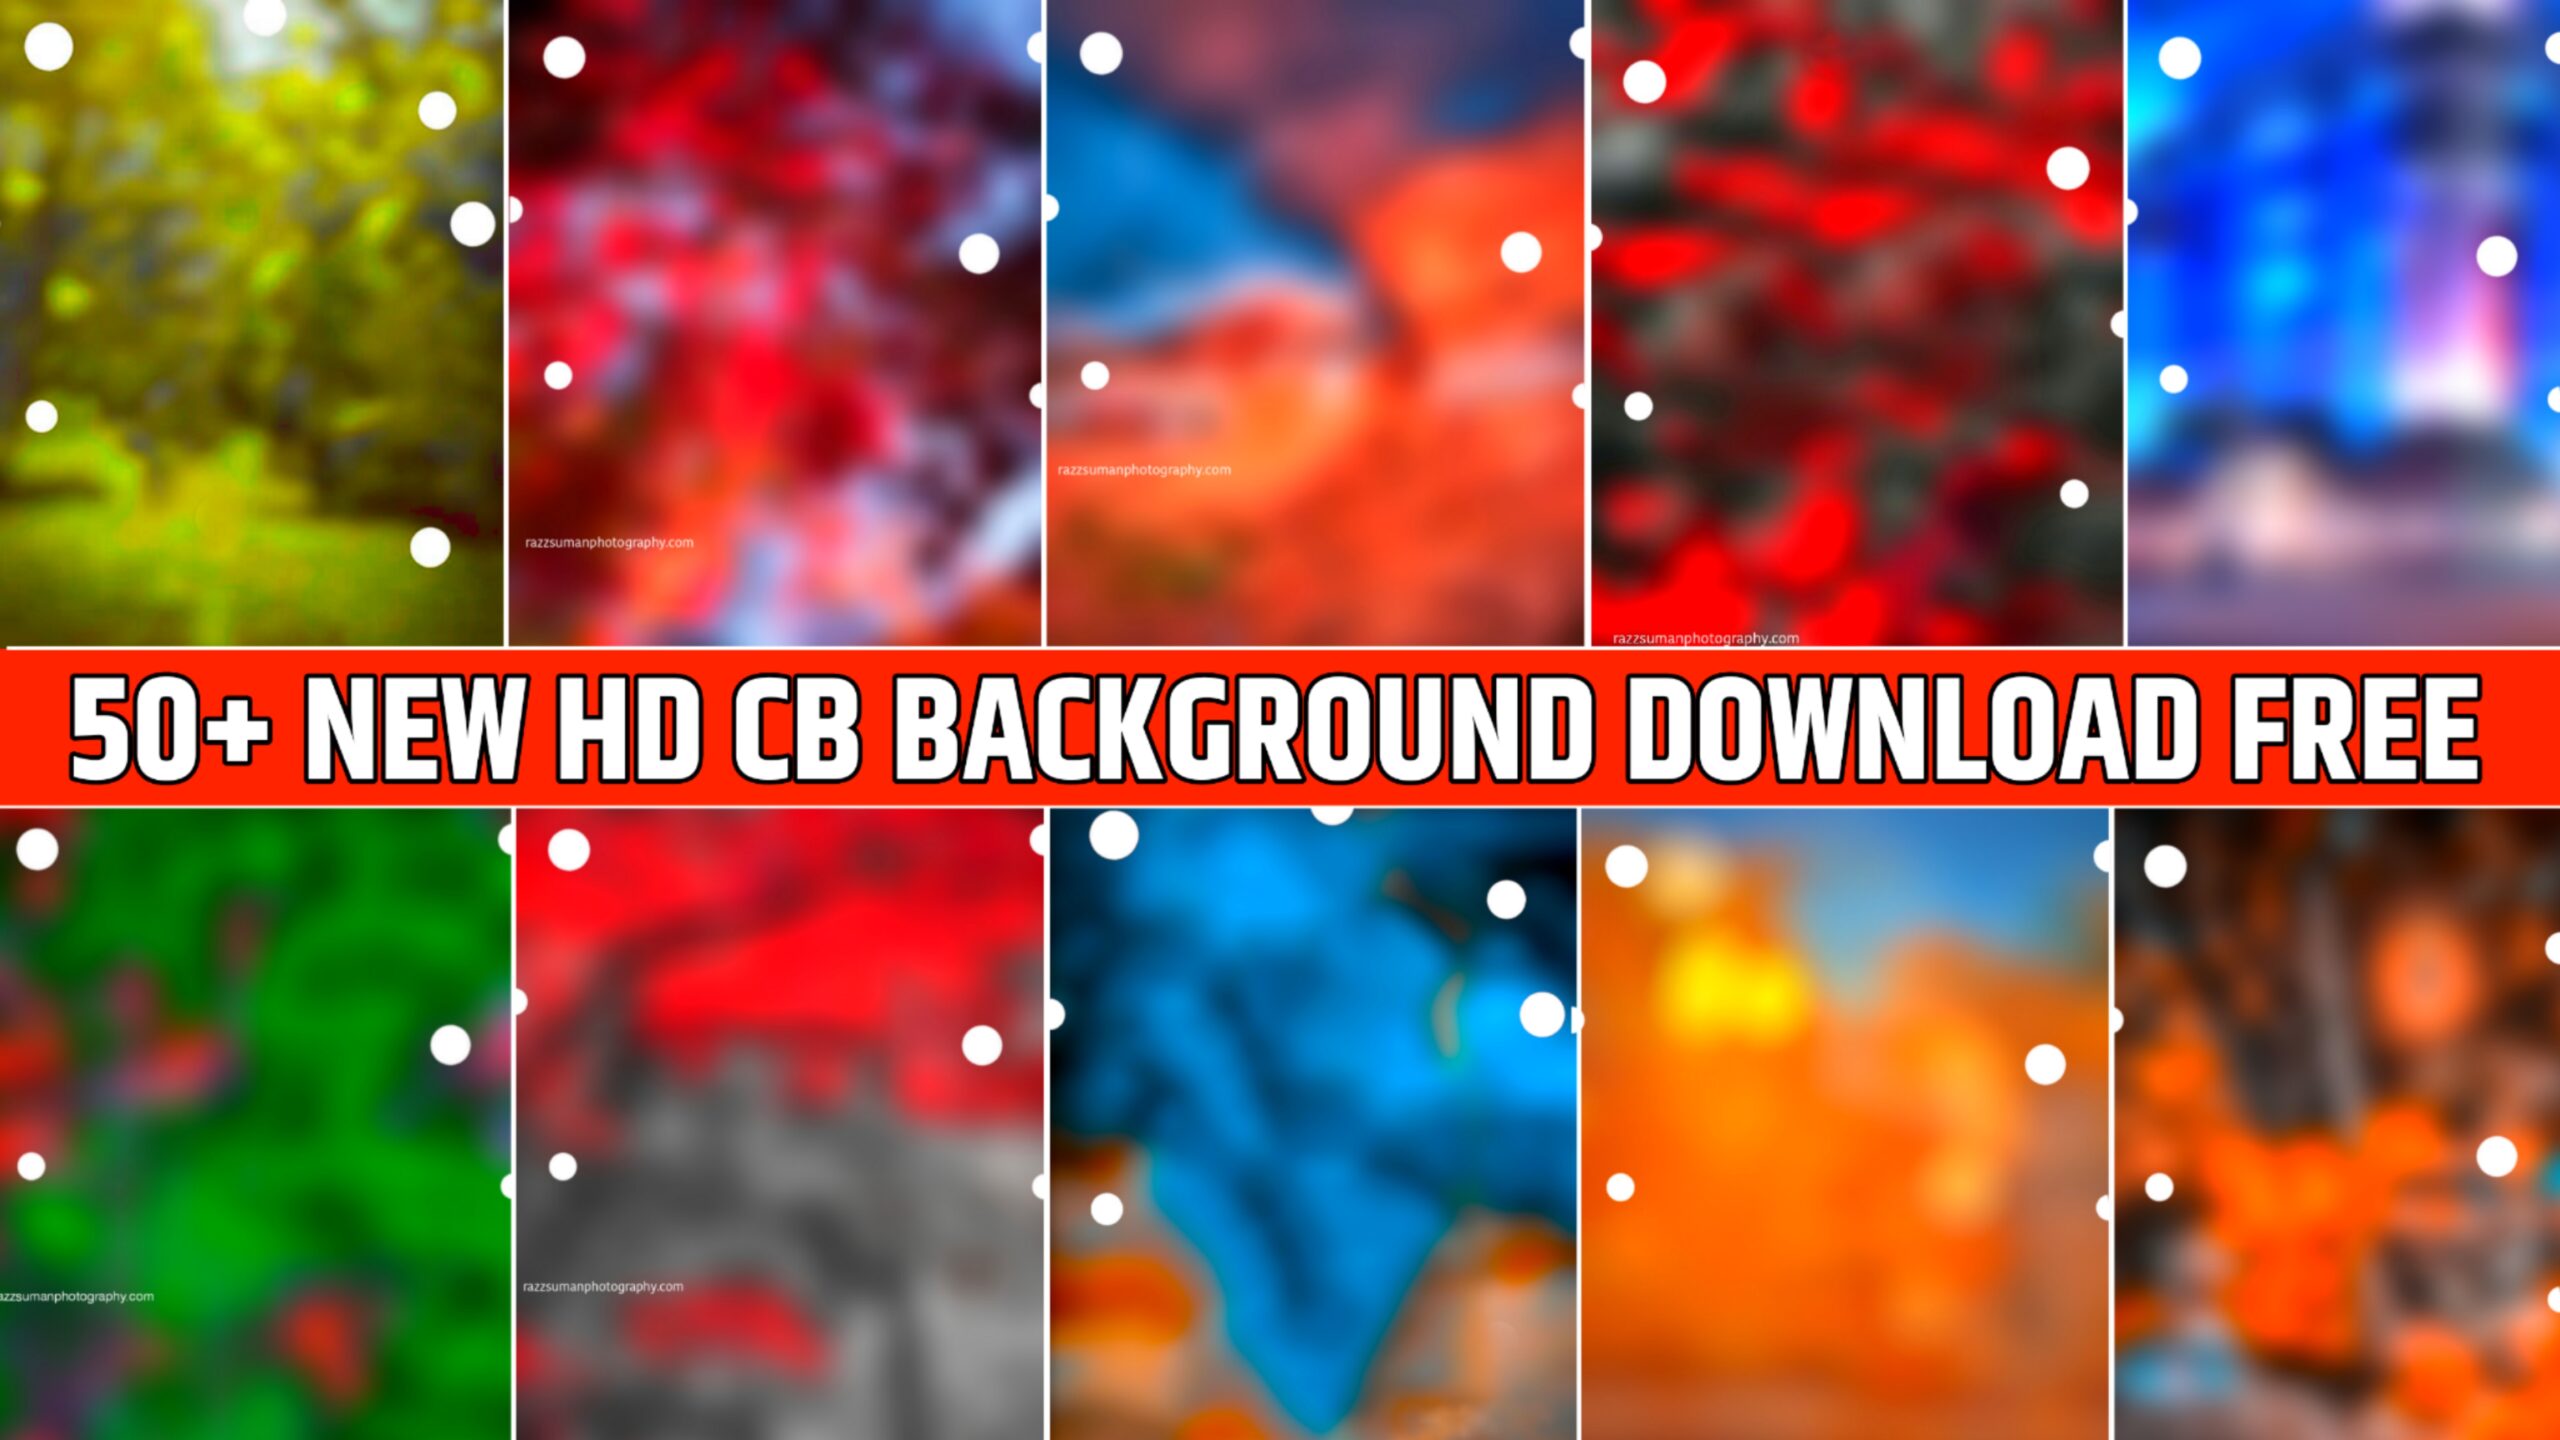 50+ New Hd Cb Background Download Free | Cb Editing Background Download -  Razz Suman Photography